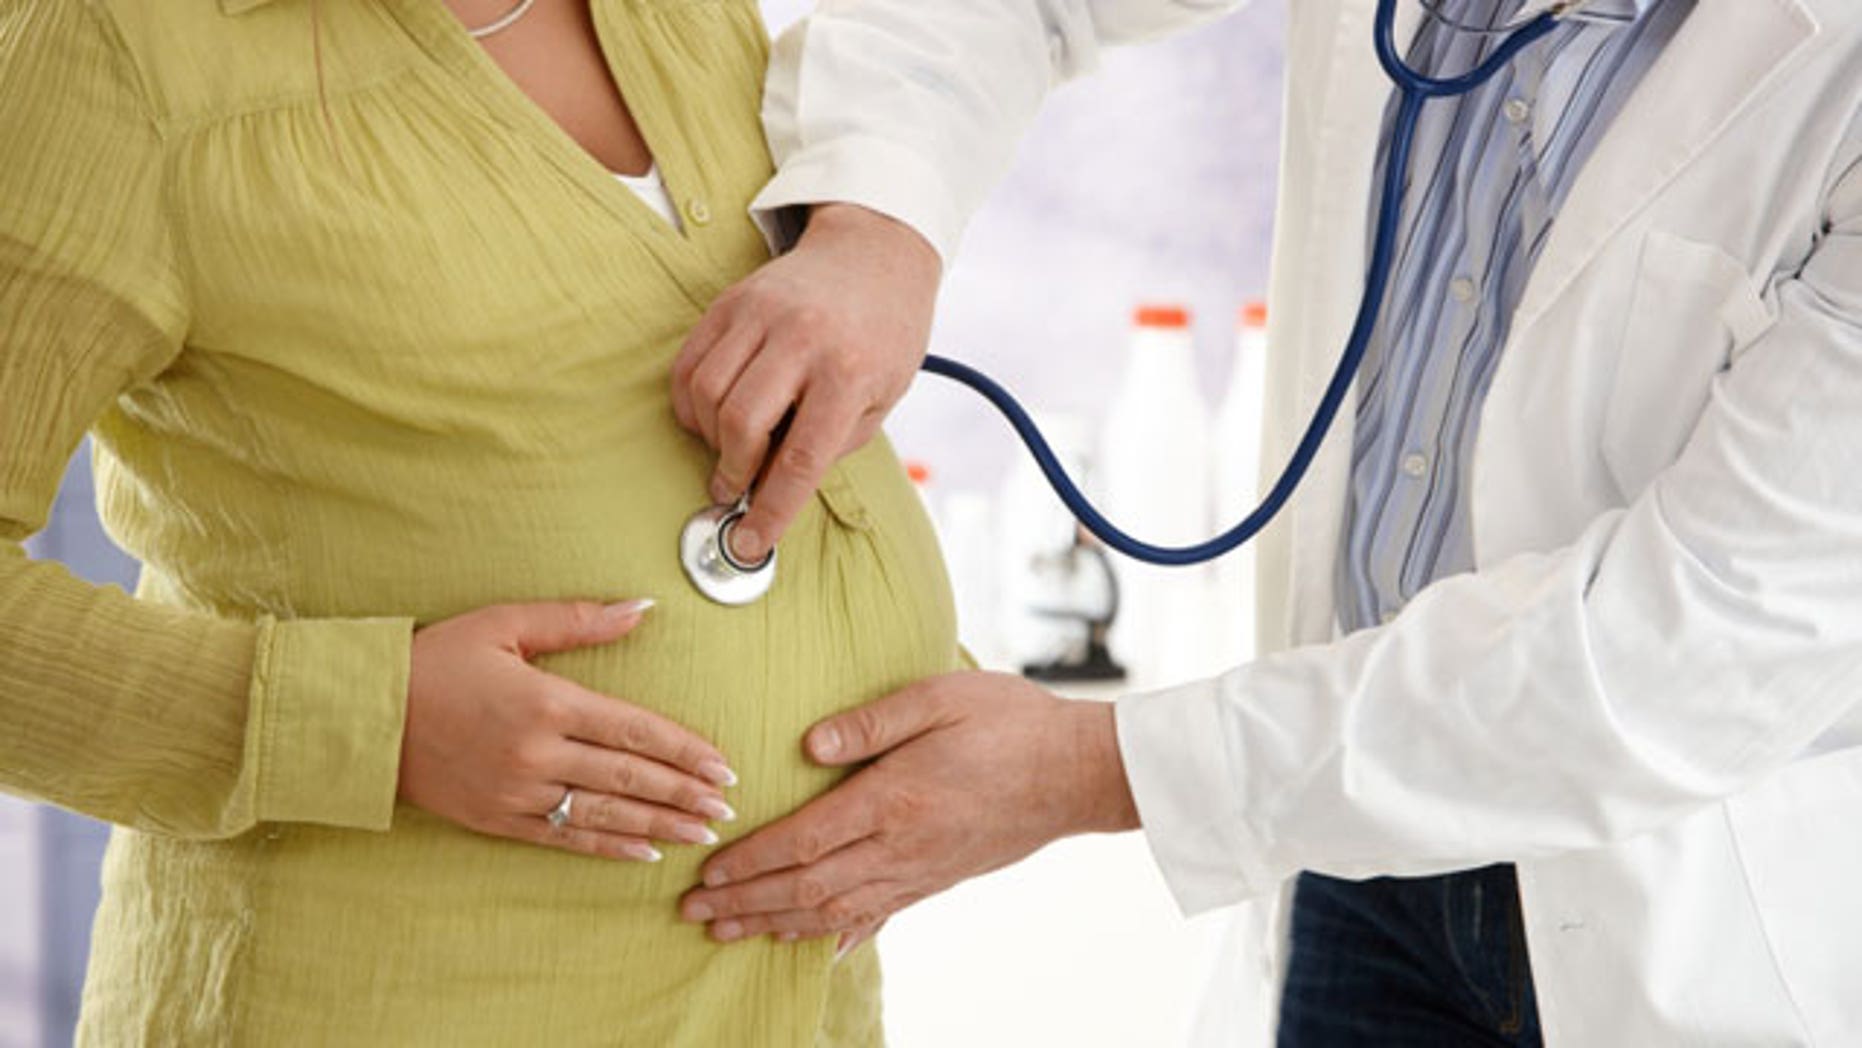 10 pregnancy tips your doctor won